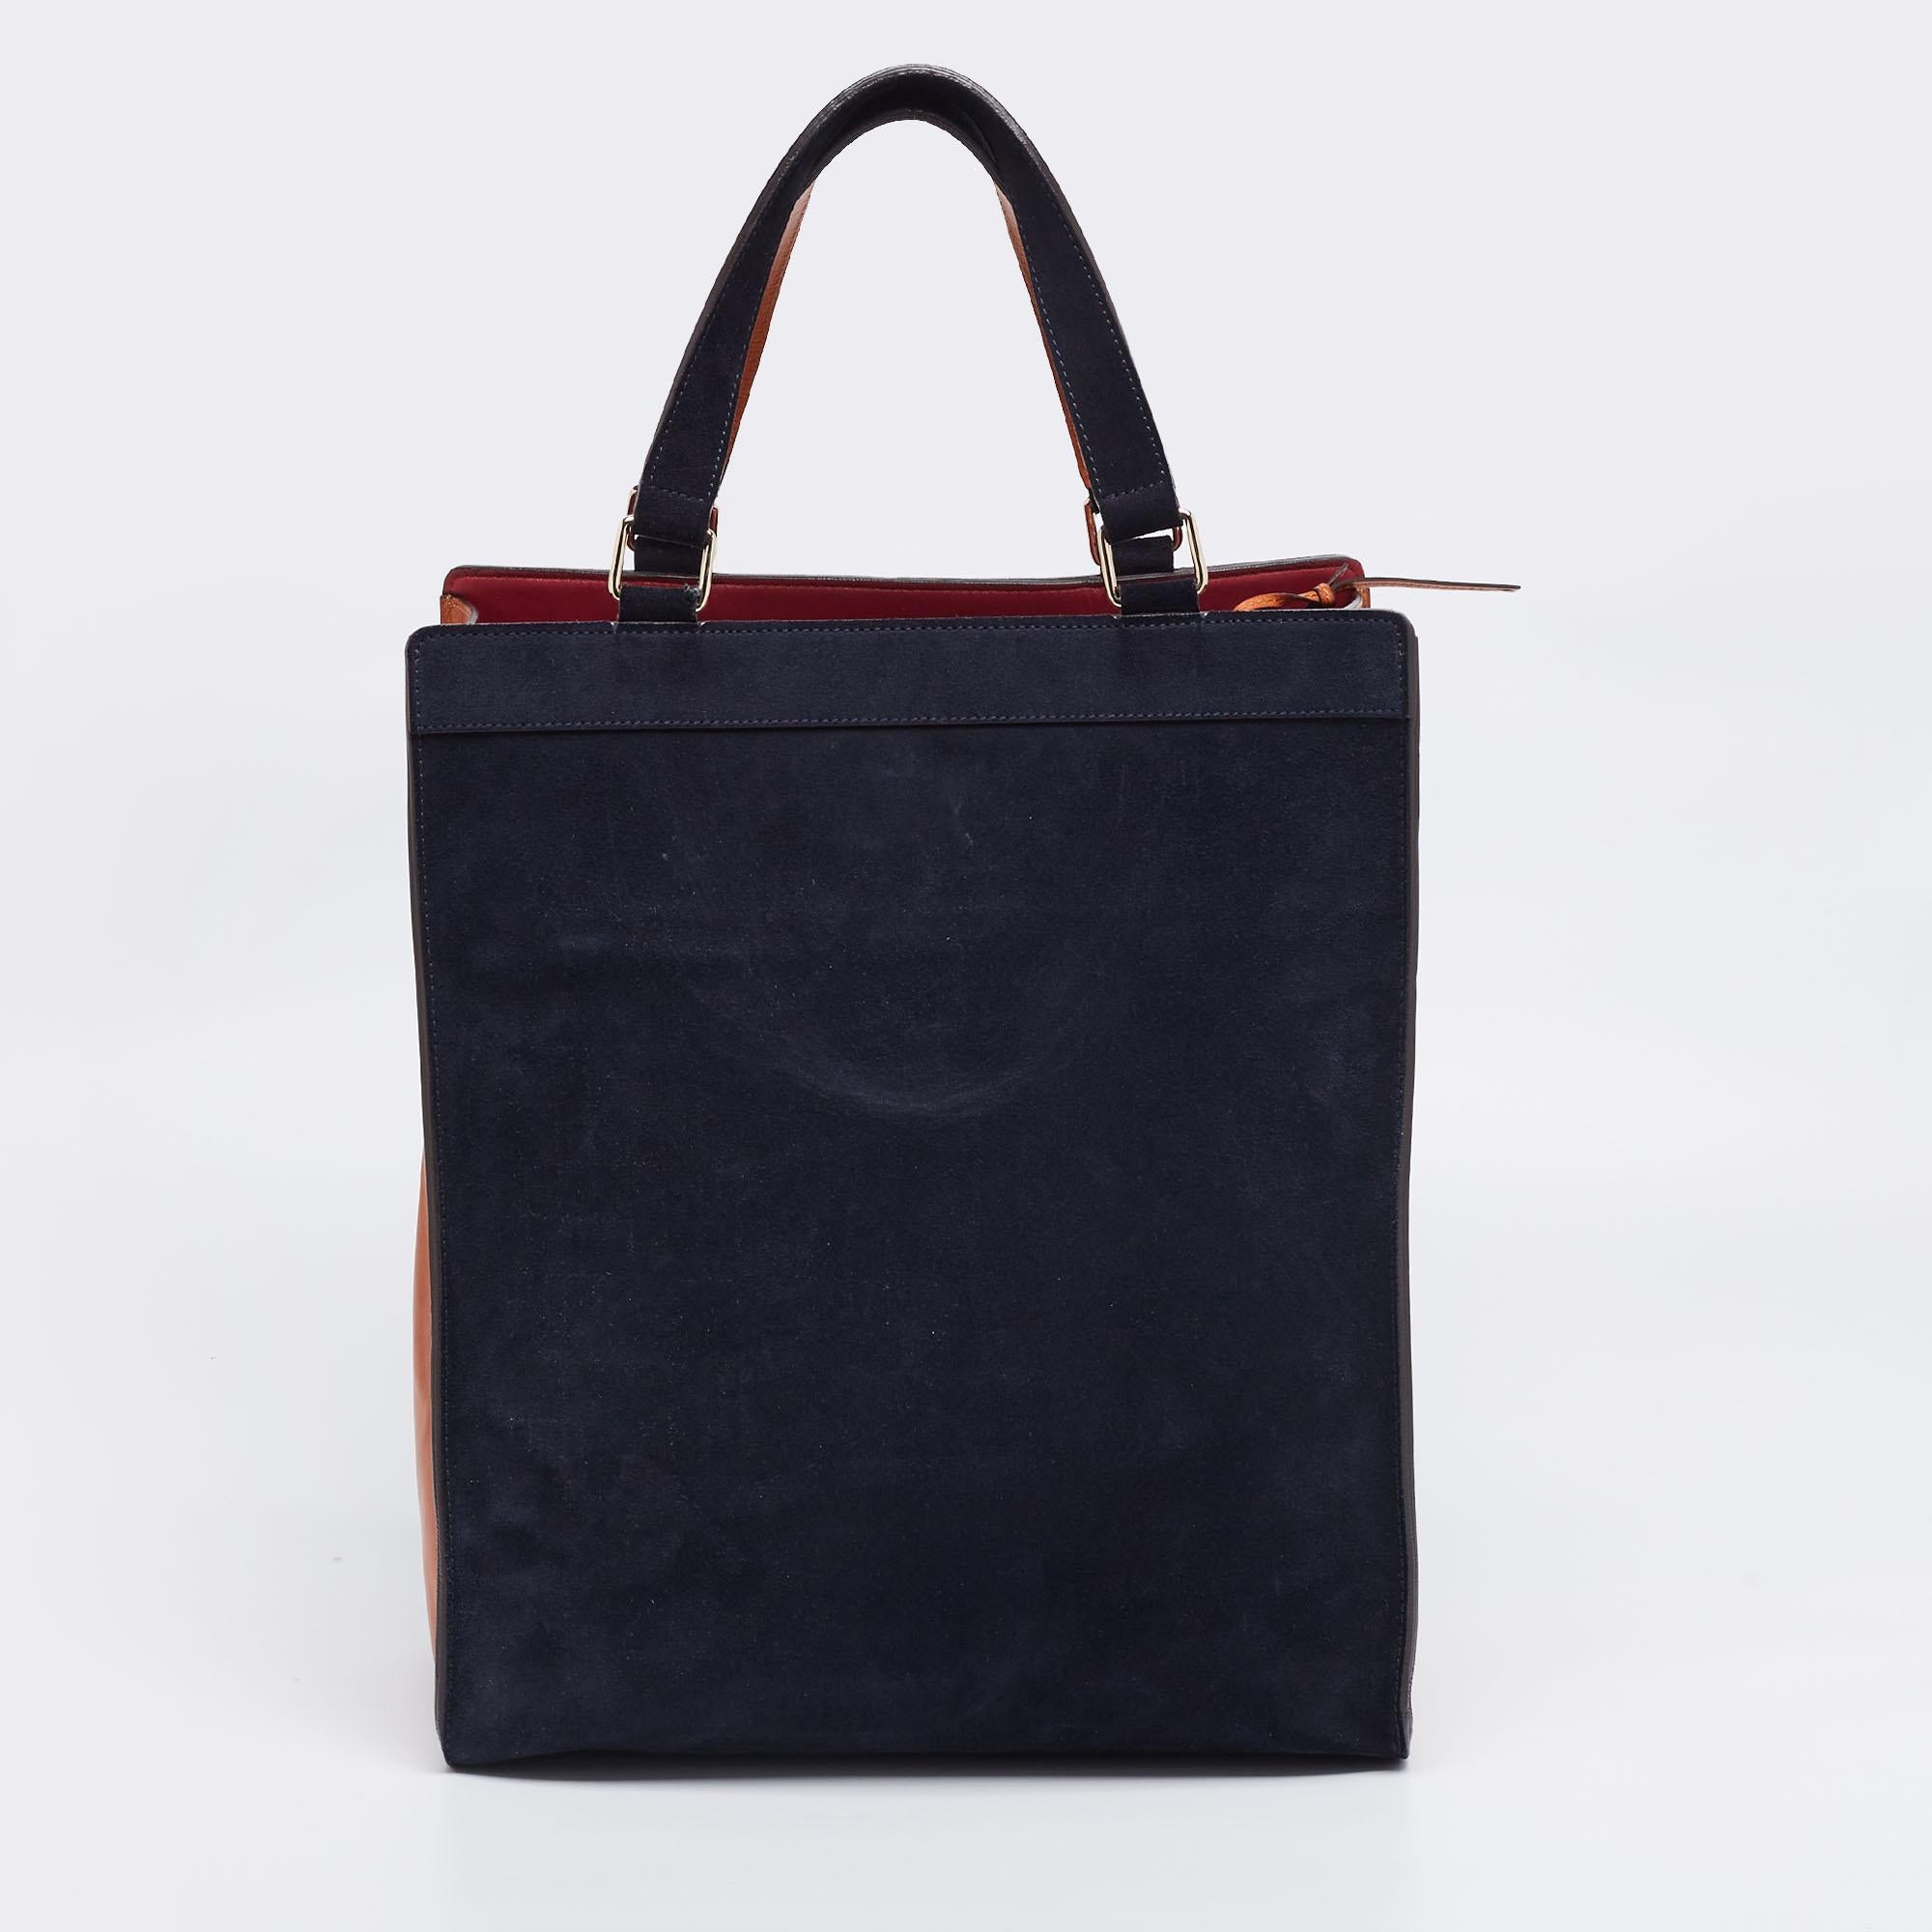 This pre-owned Chloe tote will be a lovely addition to your closet. It has been crafted from navy blue suede as well as tan leather and added with gold-tone hardware, two top handles, a front zip pocket, and a leather-lined interior.

Includes: